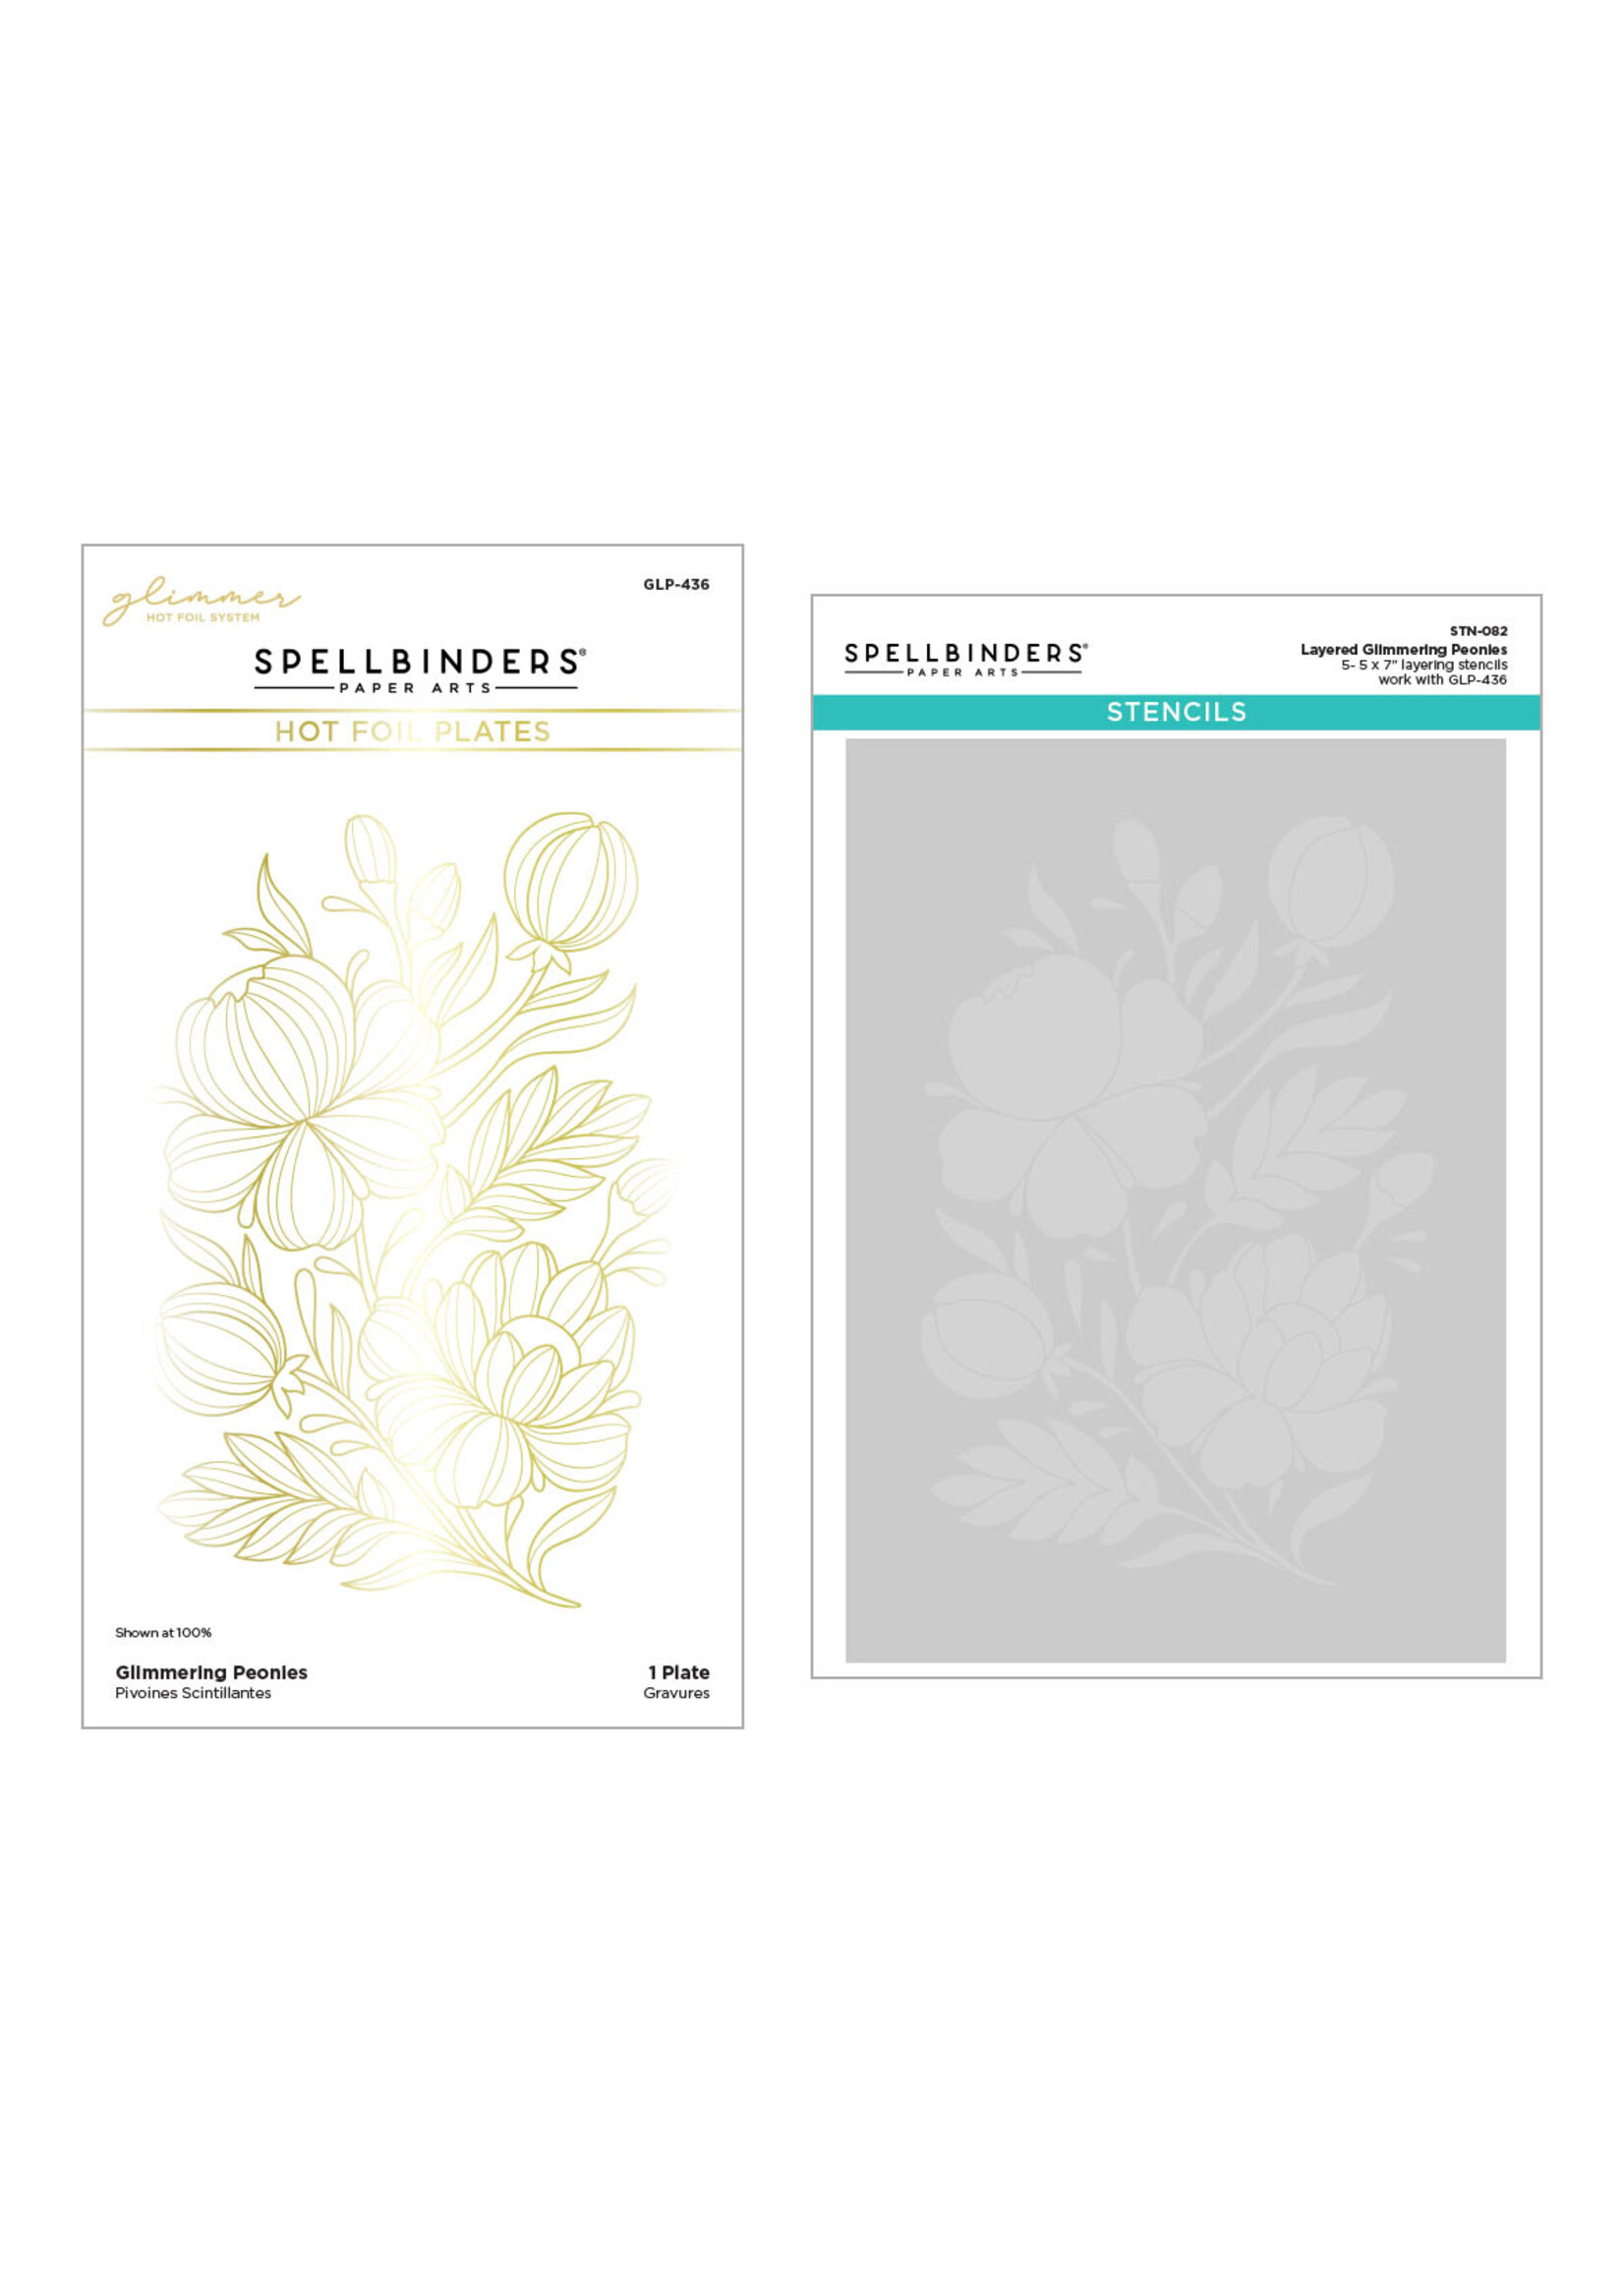 spellbinders Glimmering Peonies Glimmer Plate and Stencil Bundle from the Glimmering Flowers Collection